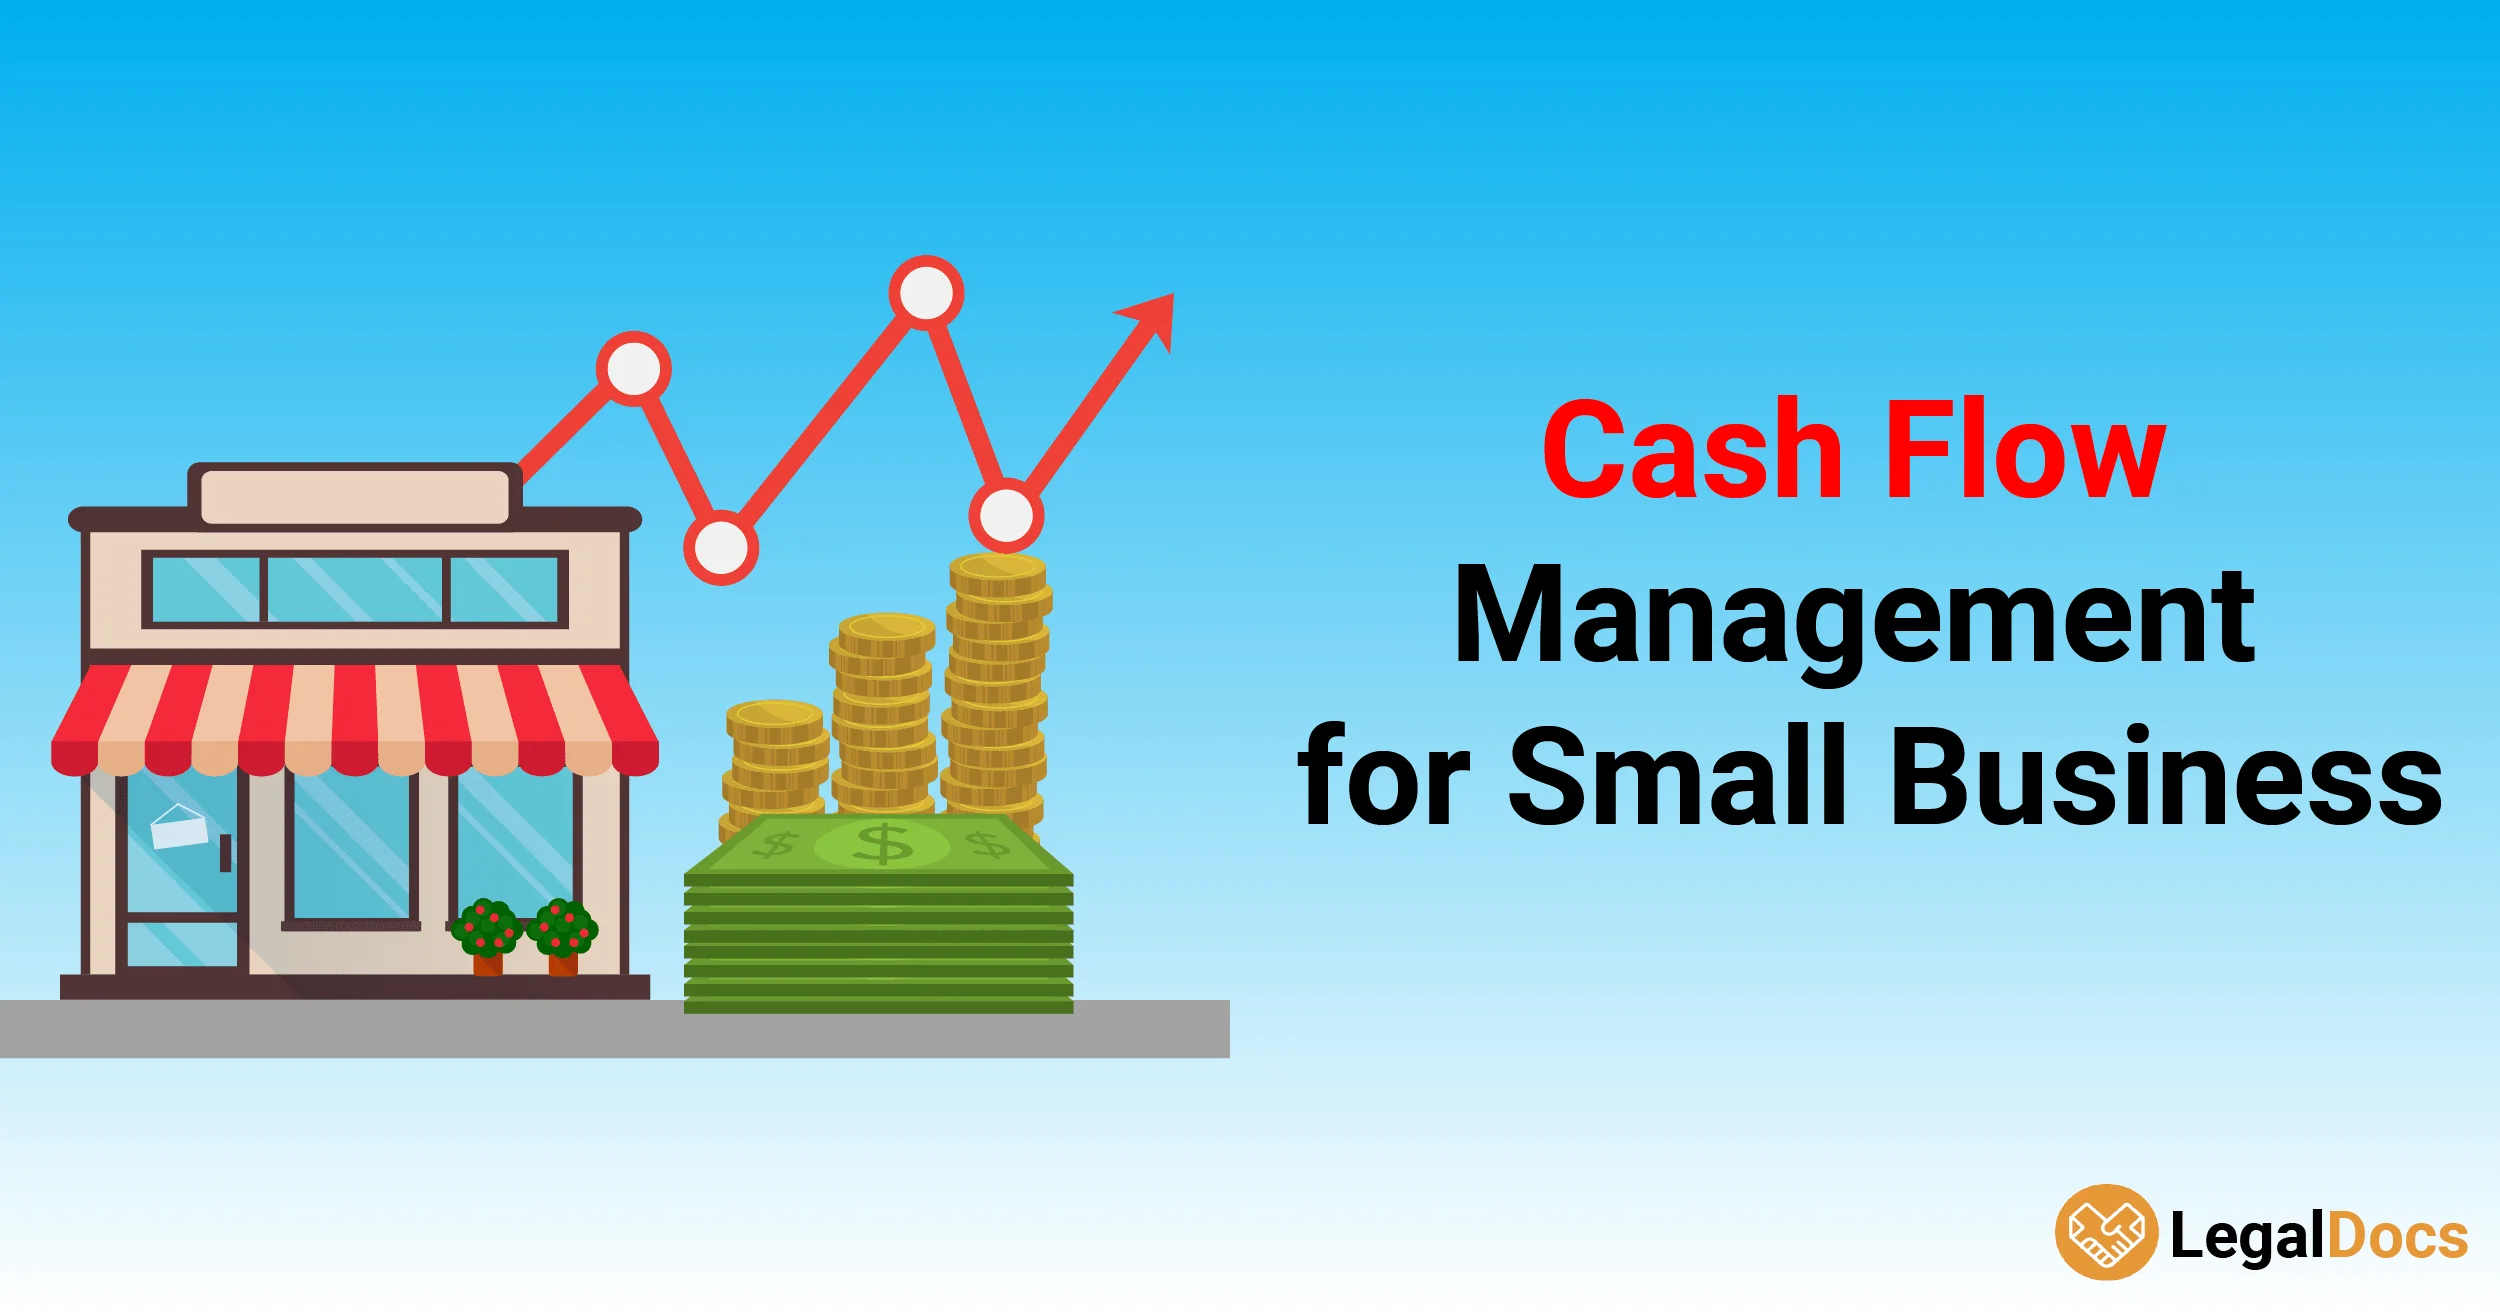 Cash Flow Management for Small Business